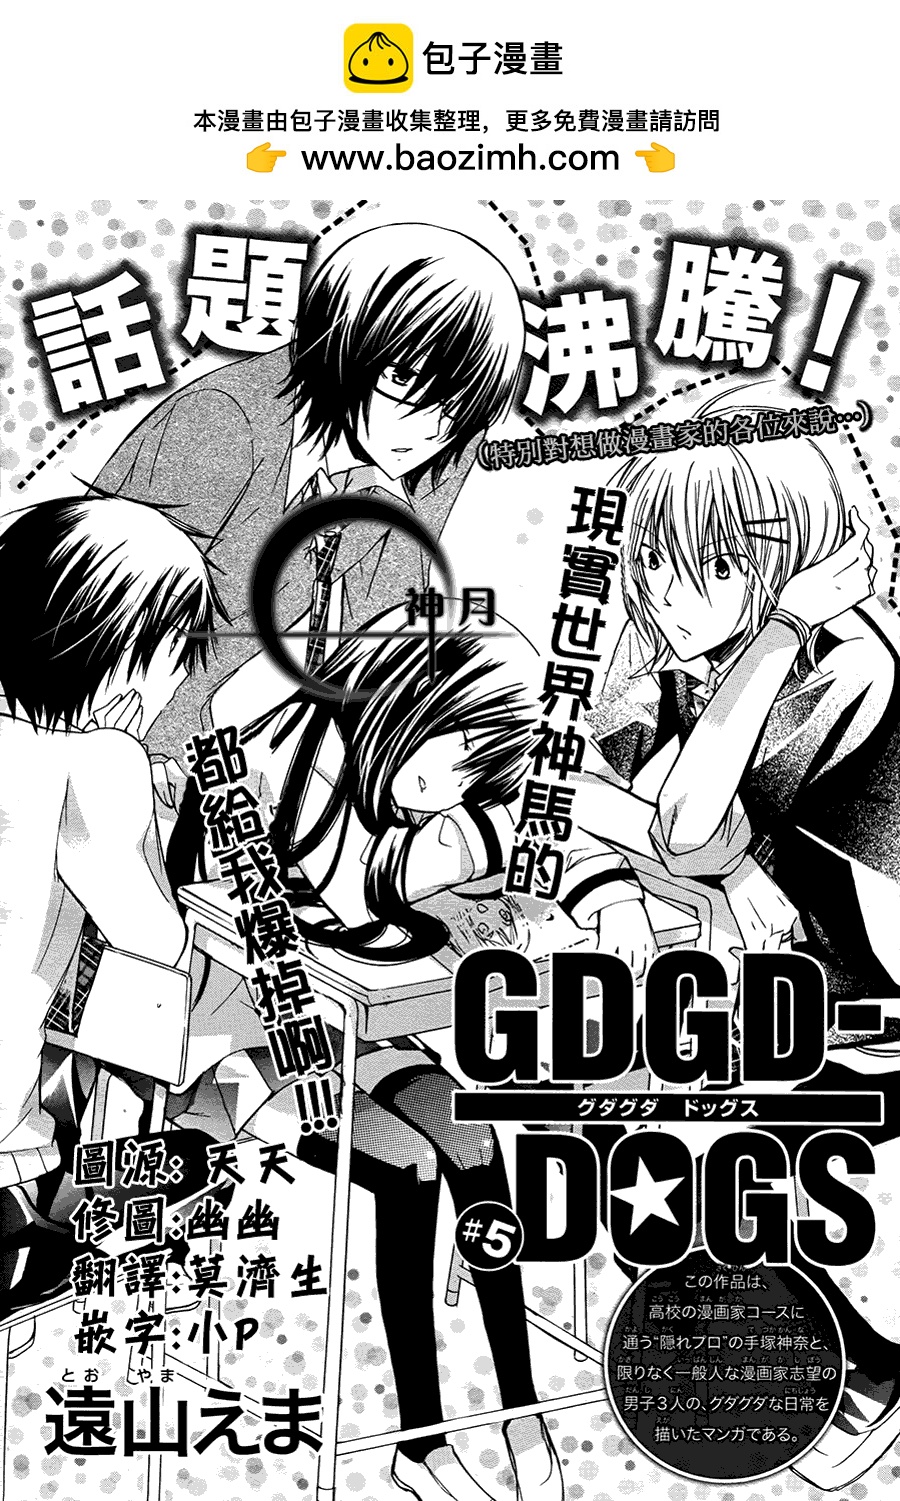 GDGD-DOGS - 第05話 - 1